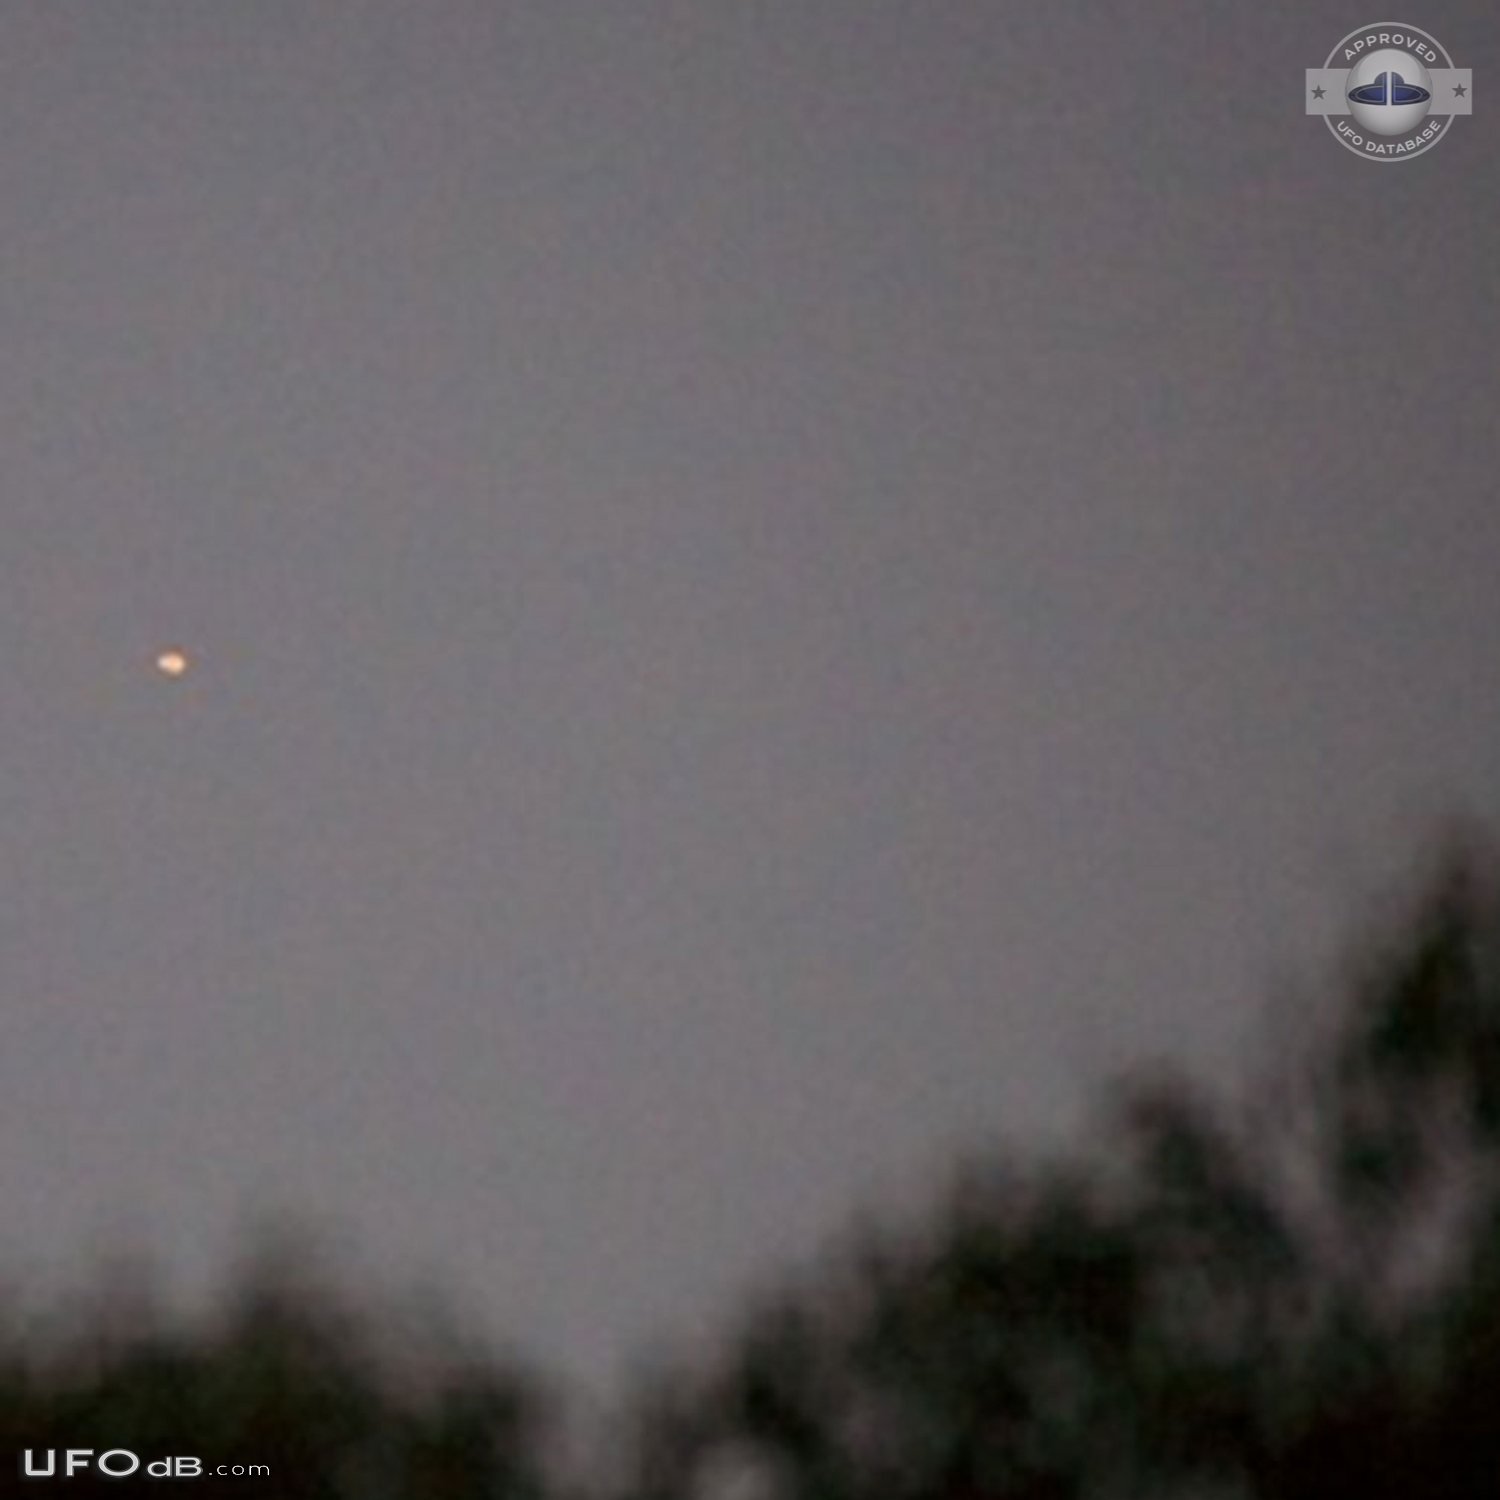 Day light large silver UFO in Fremantle Western Australia January 2015 UFO Picture #655-2